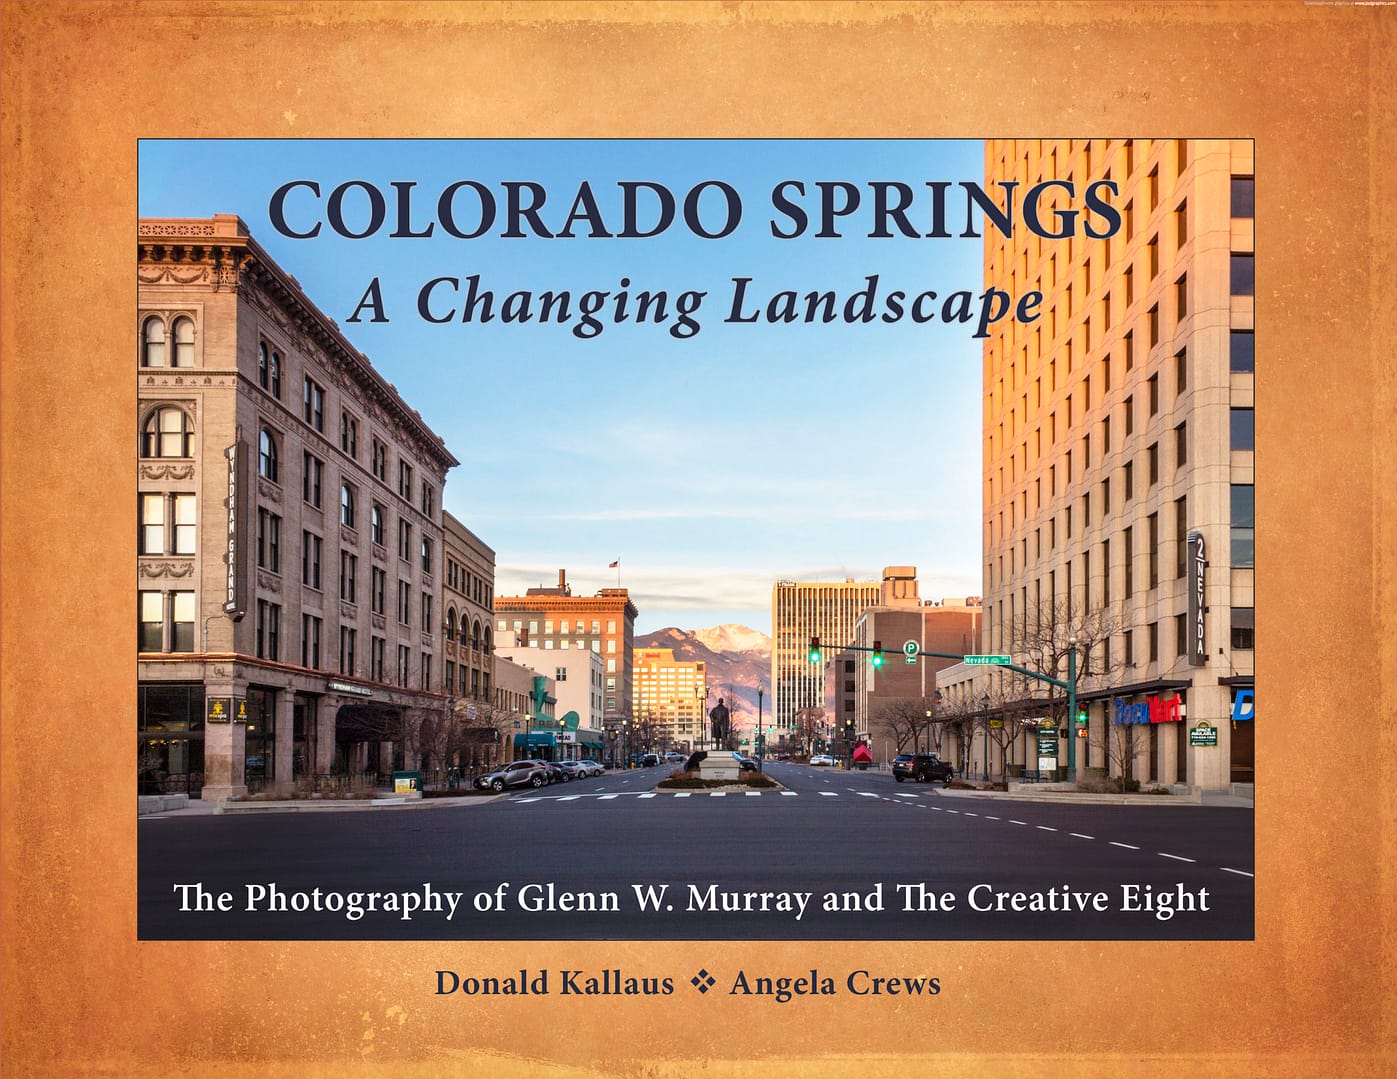 “COLORADO SPRINGS: A Changing Landscape” by Donald Kallaus